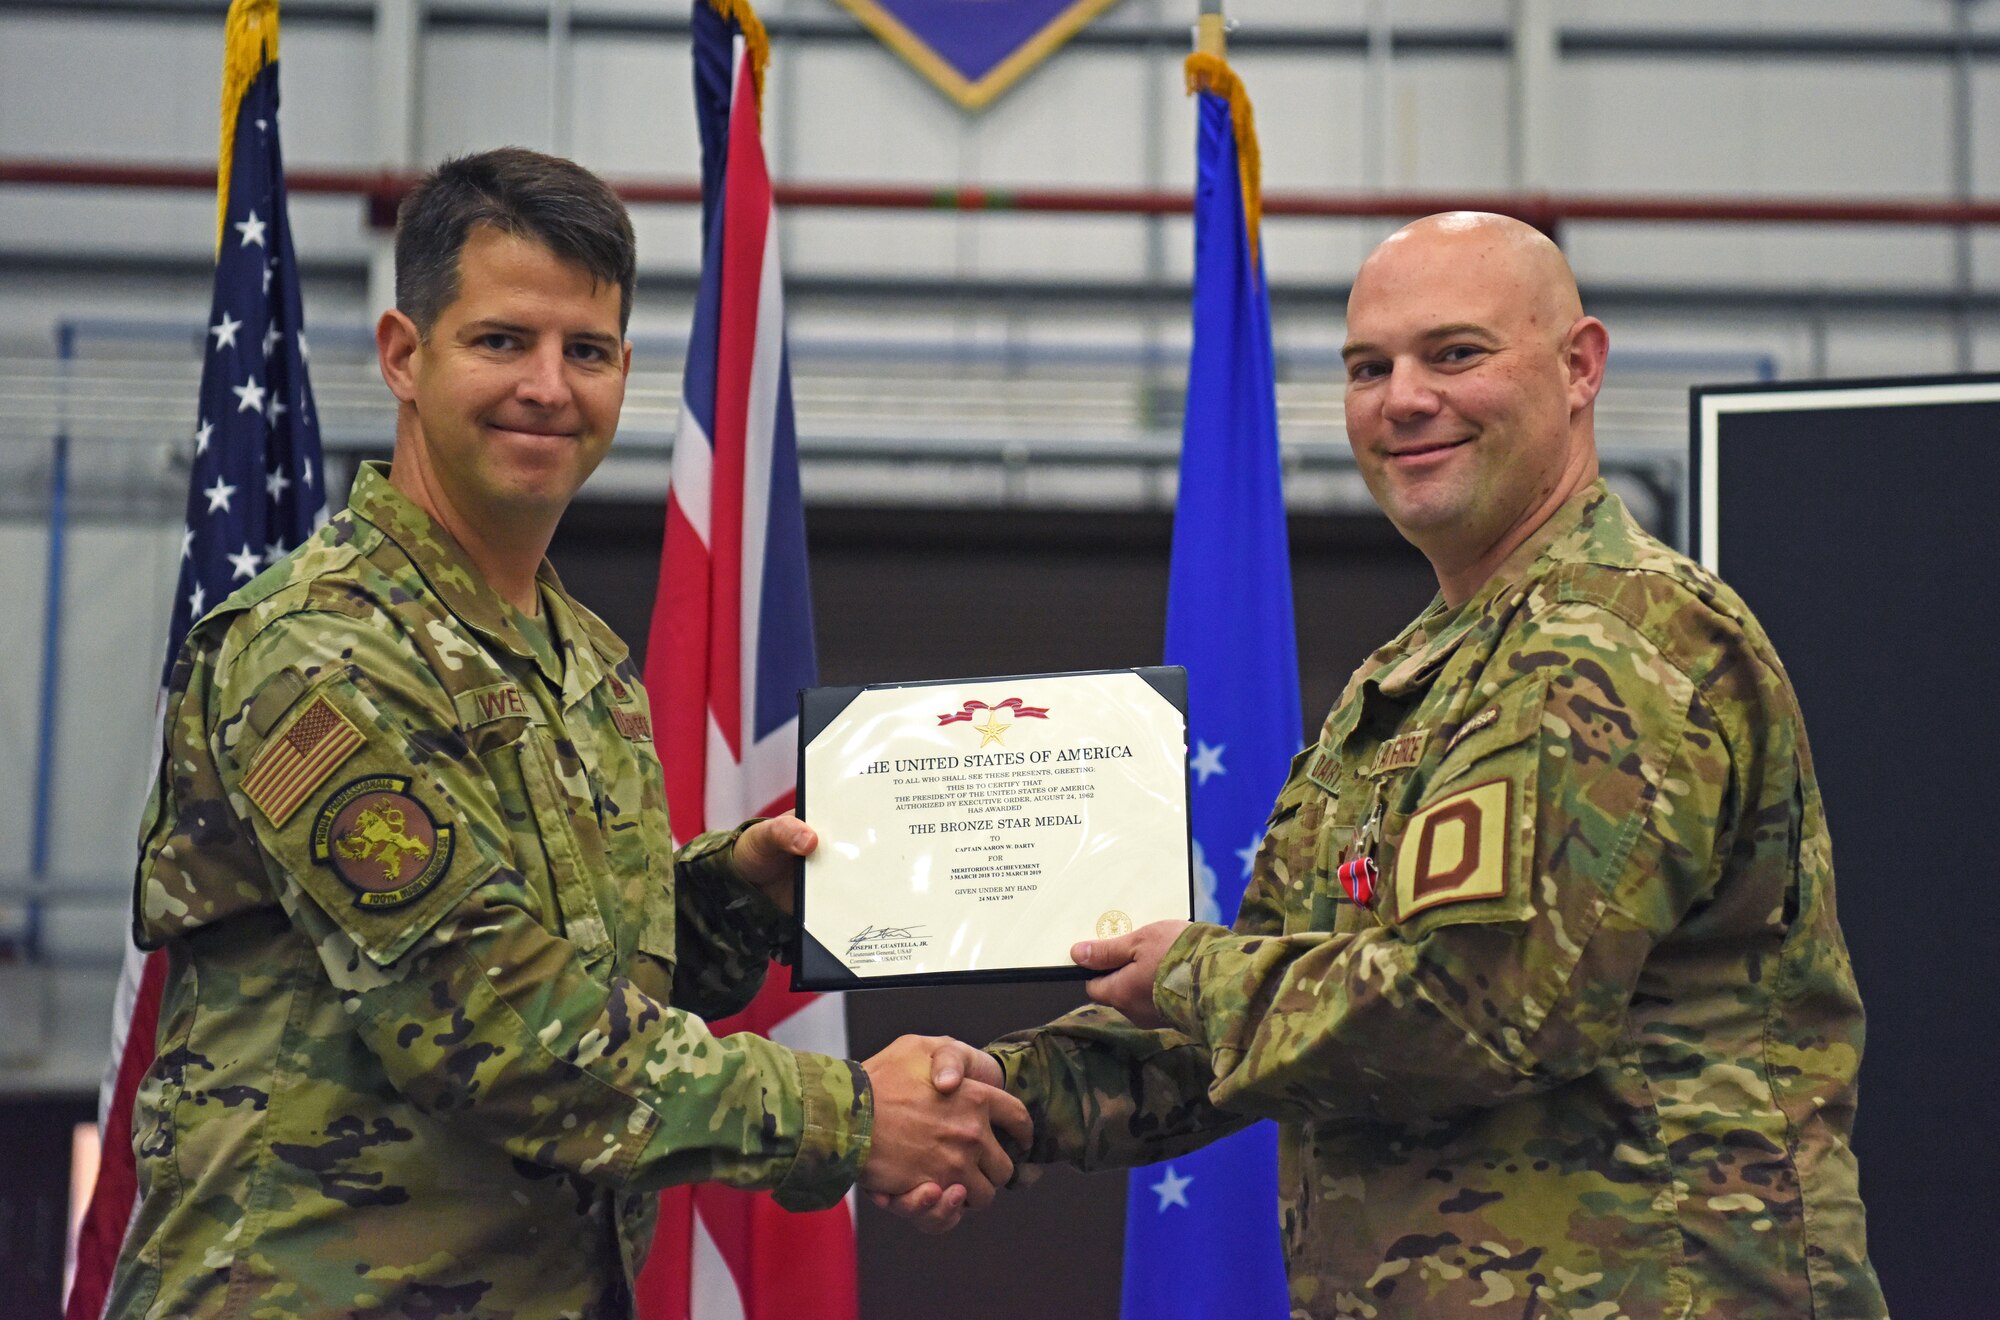 U.S. Air Force Lt. Col. Paul Weme, 100th Maintenance Group commander, presents Maj. Aaron Darty, 100th Maintenance Squadron operations officer, with a Bronze Star Medal during a ceremony held at RAF Mildenhall, England, July 1, 2019. Darty was recently awarded the Bronze Star Medal for meritorious achievement as operations officer and maintenance advisor in support of Operation Freedom Sentinel while deployed to Kandahar Airfield, Afghanistan. (U.S. Air Force photo by Airman 1st Class Brandon Esau)